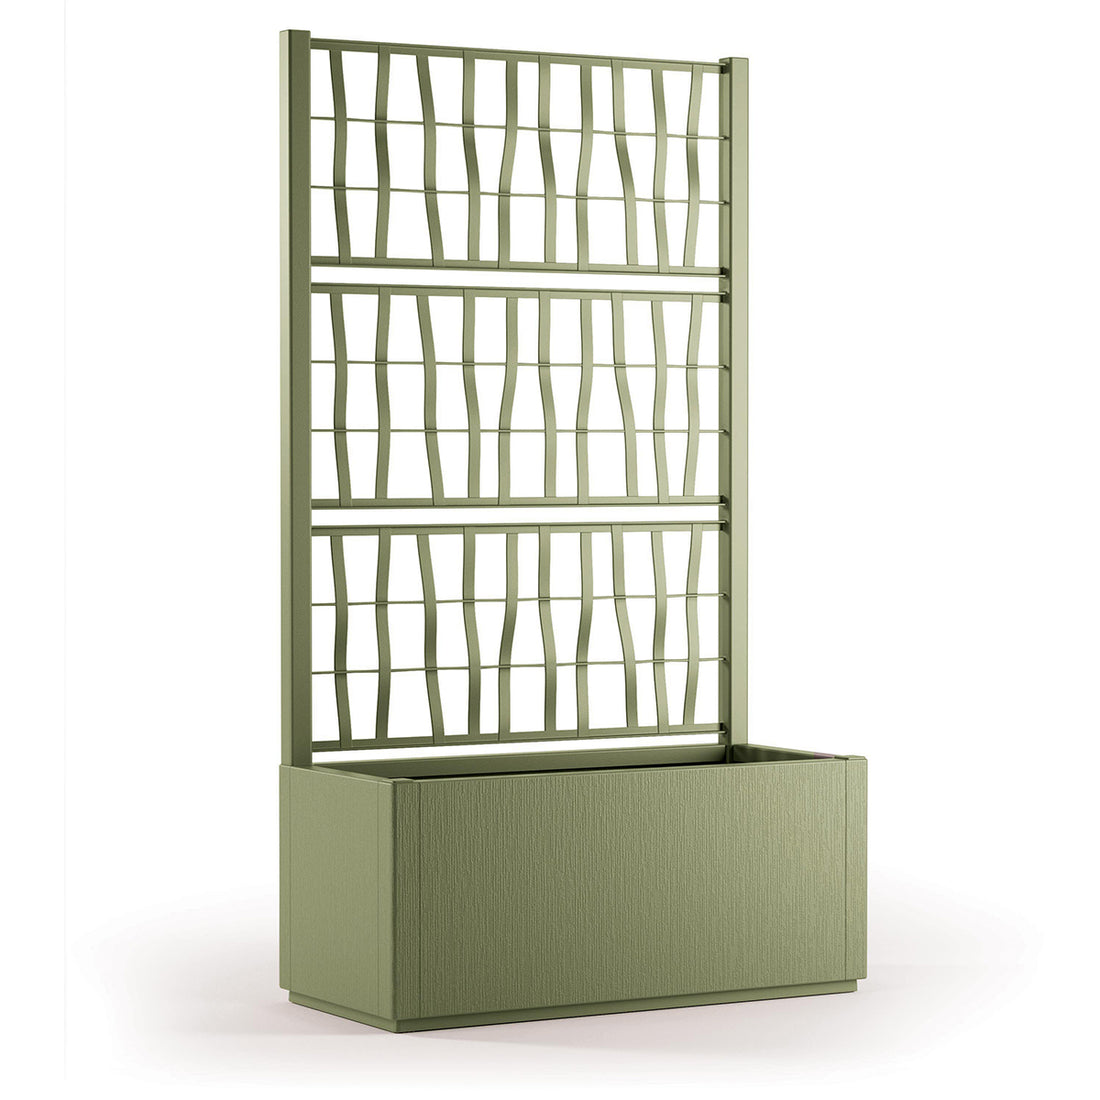 ETHICA PLANTER WITH ESPALIER CM 80X36 H140 OLIVE GREEN